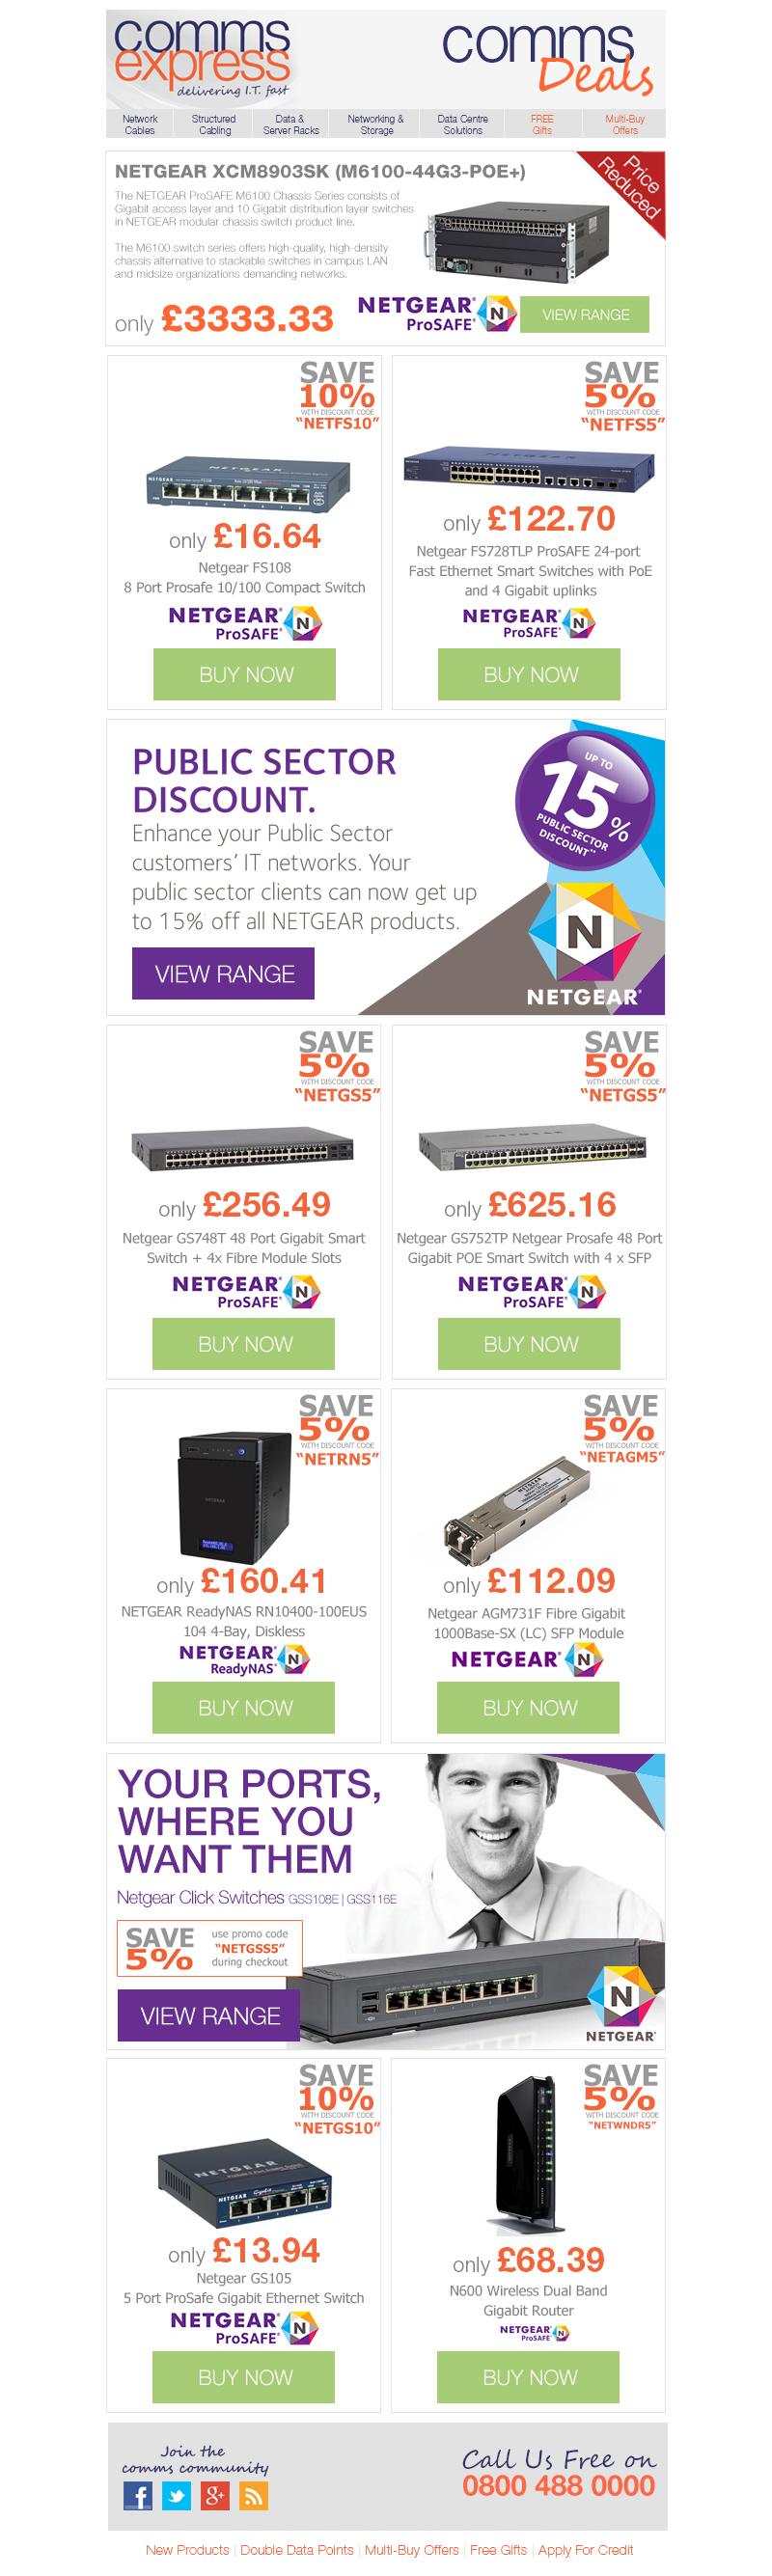 Great Savings on NETGEAR with Discount Promo Codes